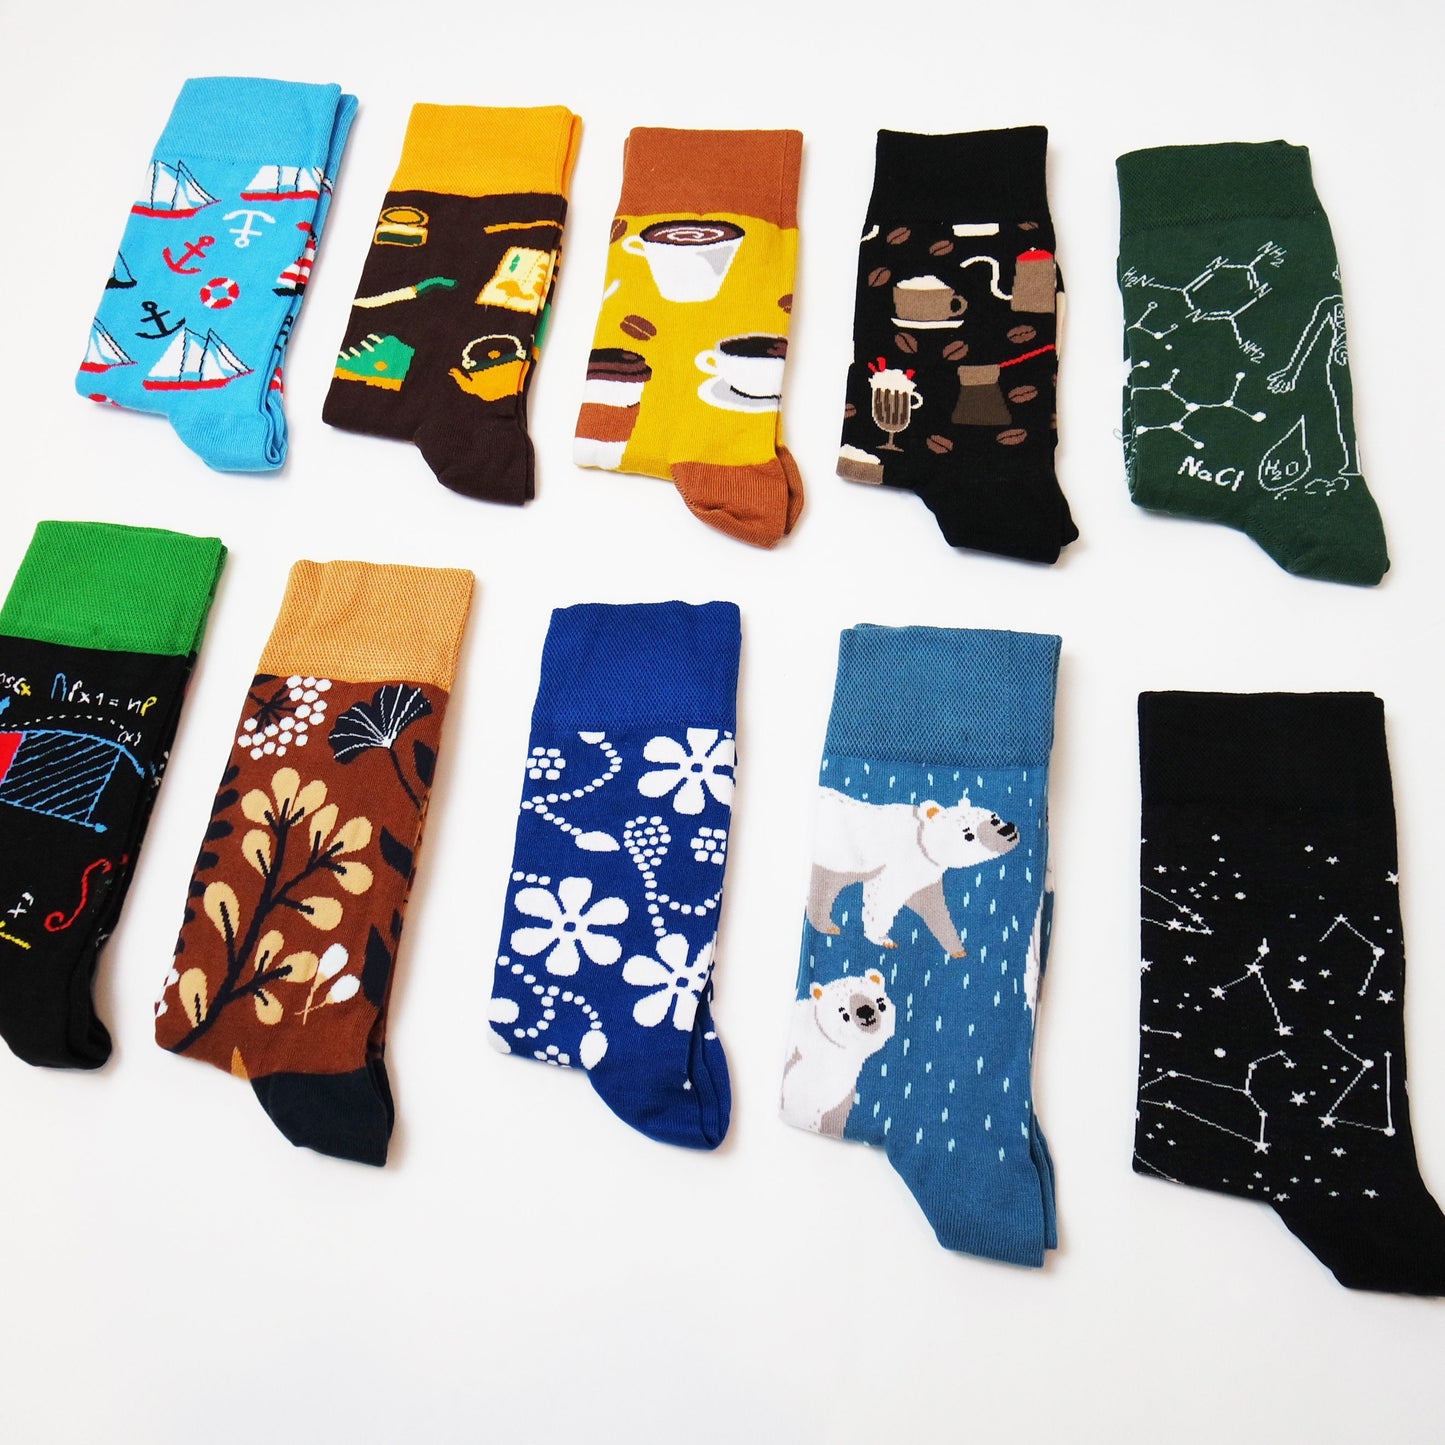 Advent Calendar Fillers, Advent Calendar For Adults, Women's Assorted Patterns, 12 Days Of Socks, Funky Colorful Crew Socks, Animal, Floral